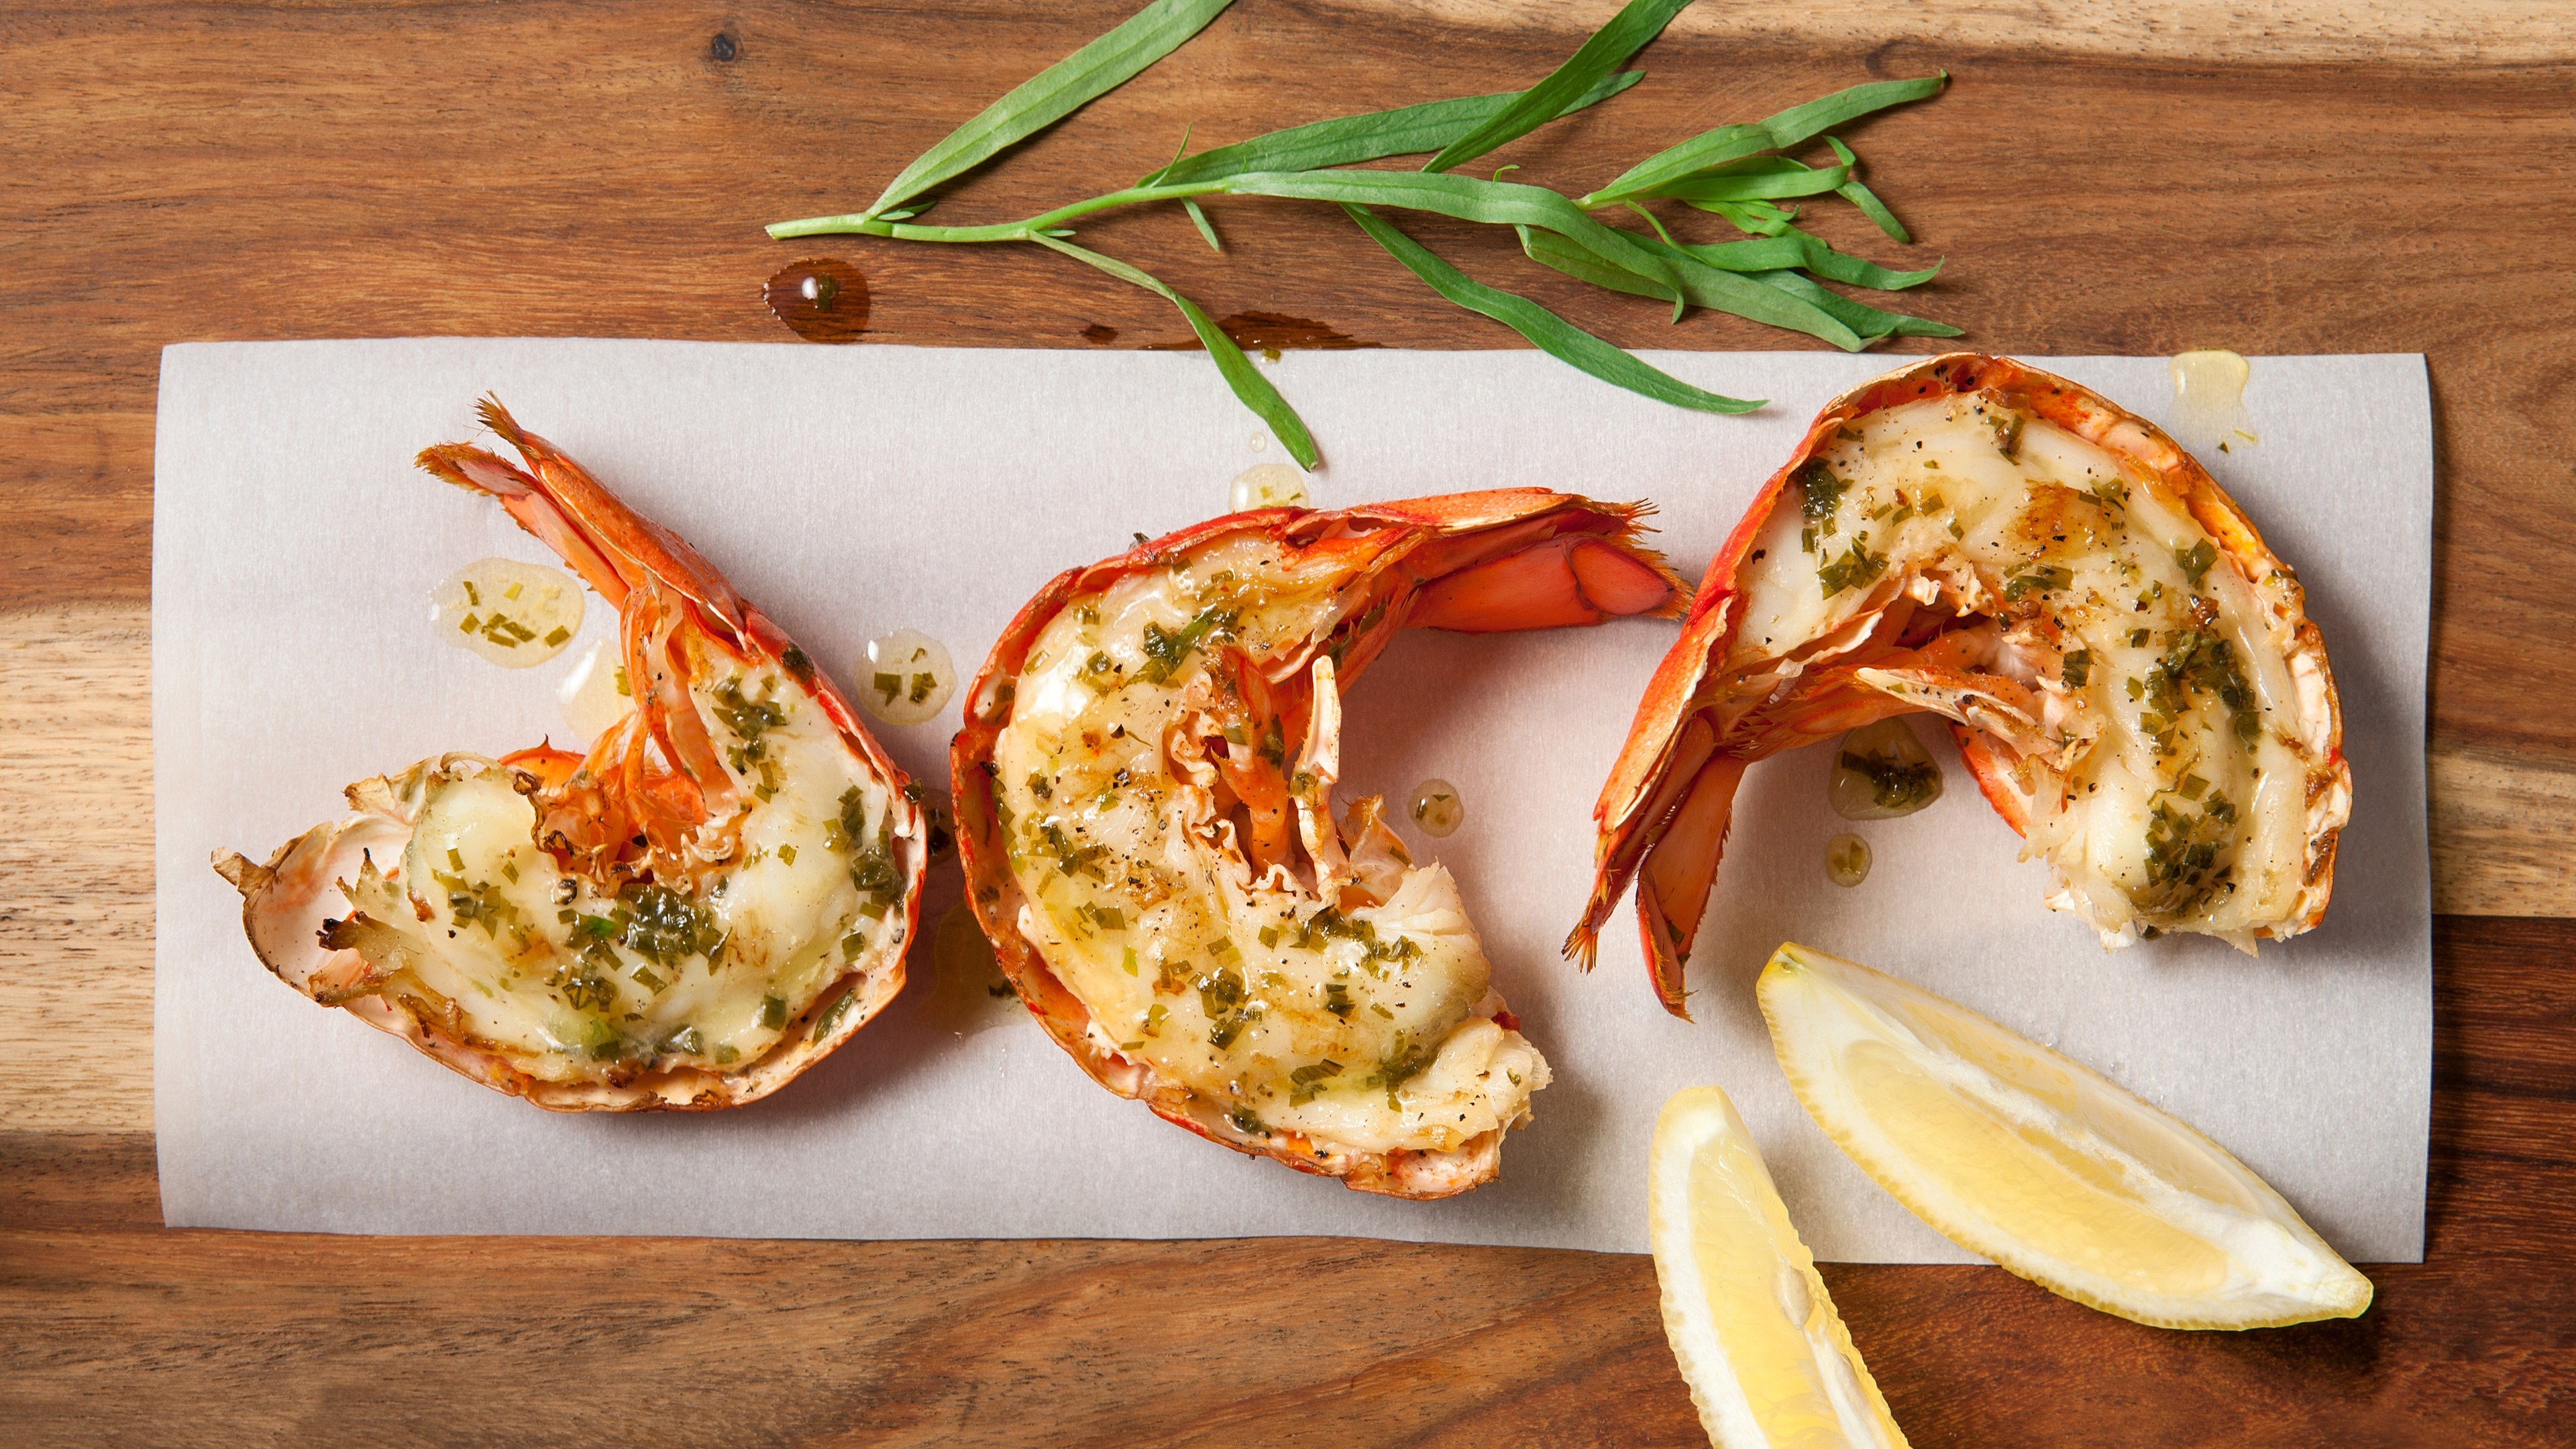 Seafood: High in several vitamins and minerals, A rich source of protein. 3840x2160 4K Wallpaper.